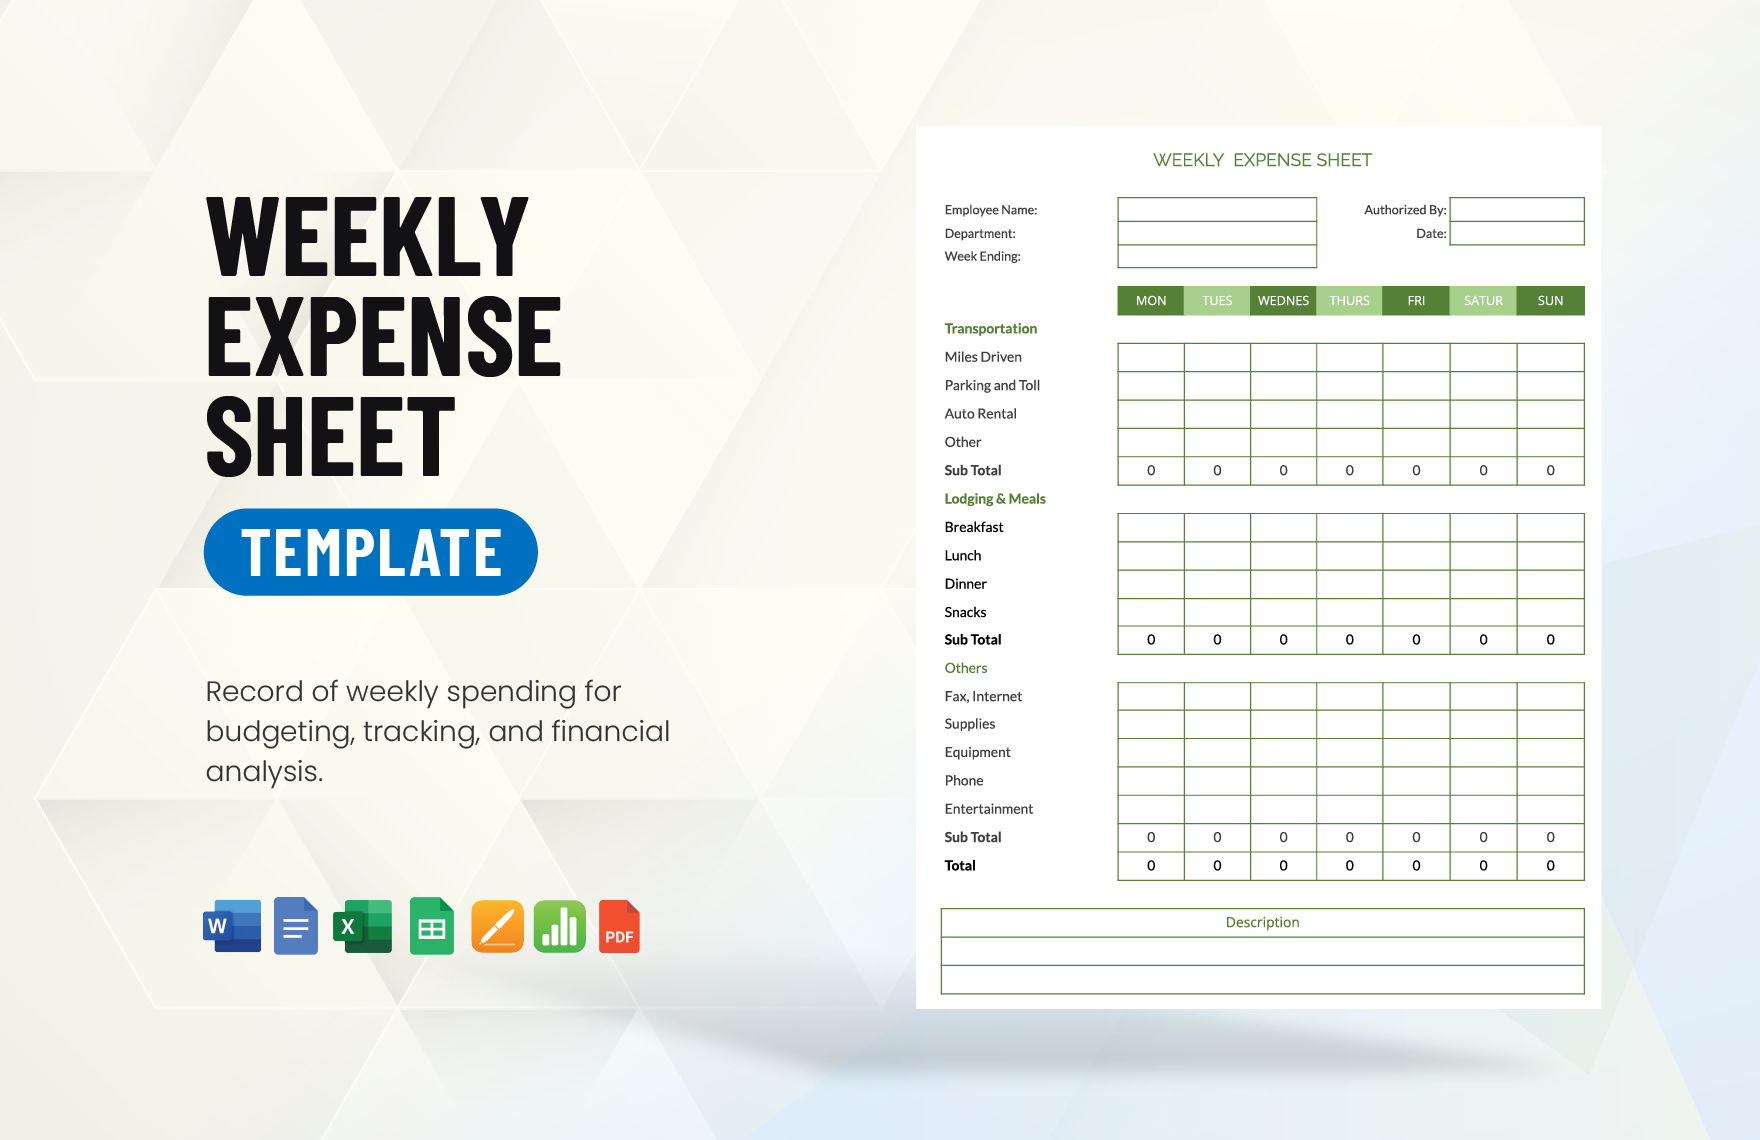 Weekly Expense Sheet Template in Word, Google Docs, Excel, PDF, Google Sheets, Apple Pages, Apple Numbers